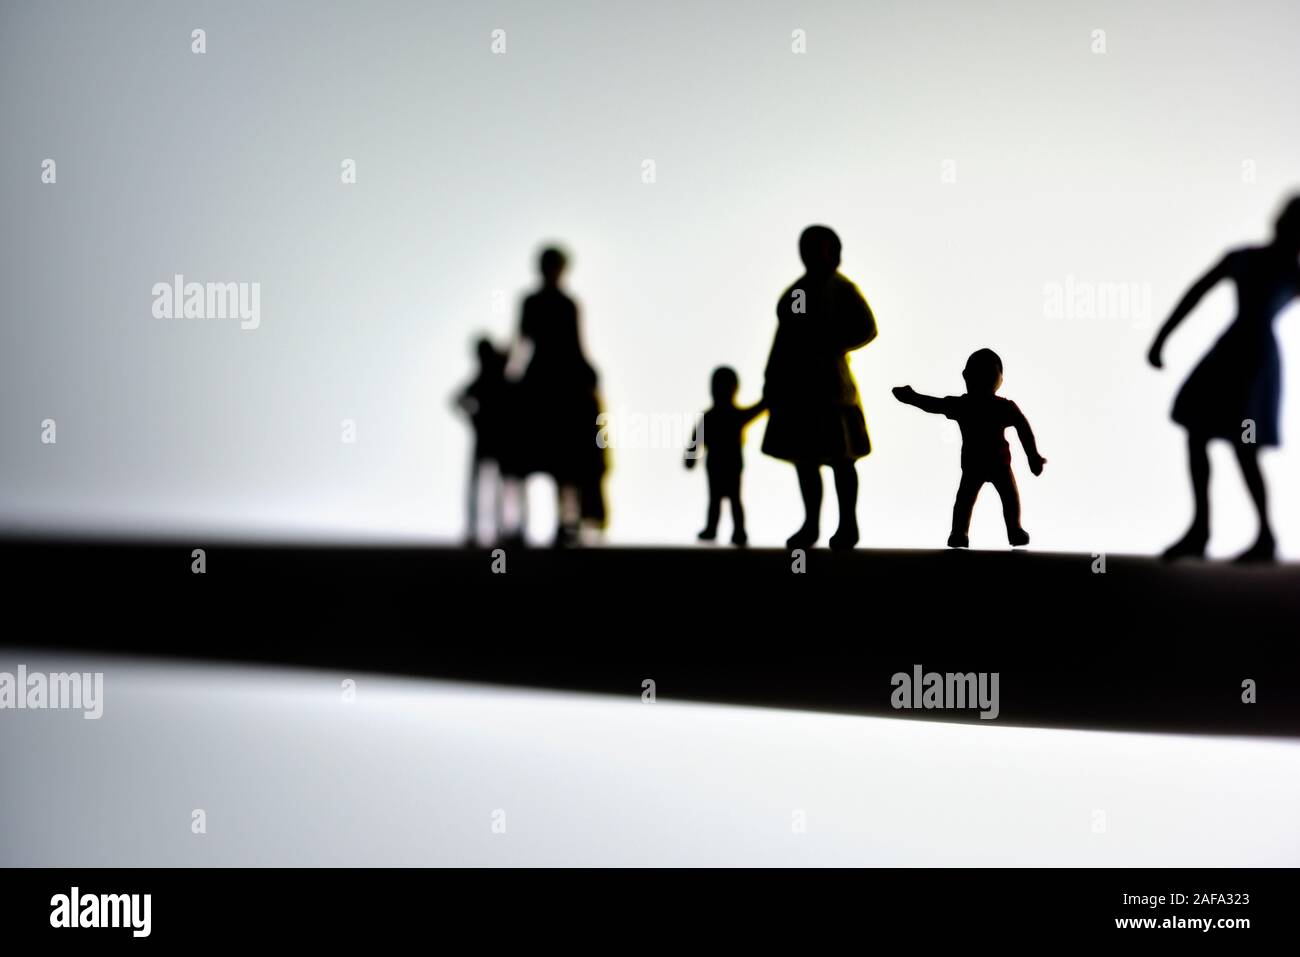 miniature figurines, mothers and children,concept,silhouette Stock Photo